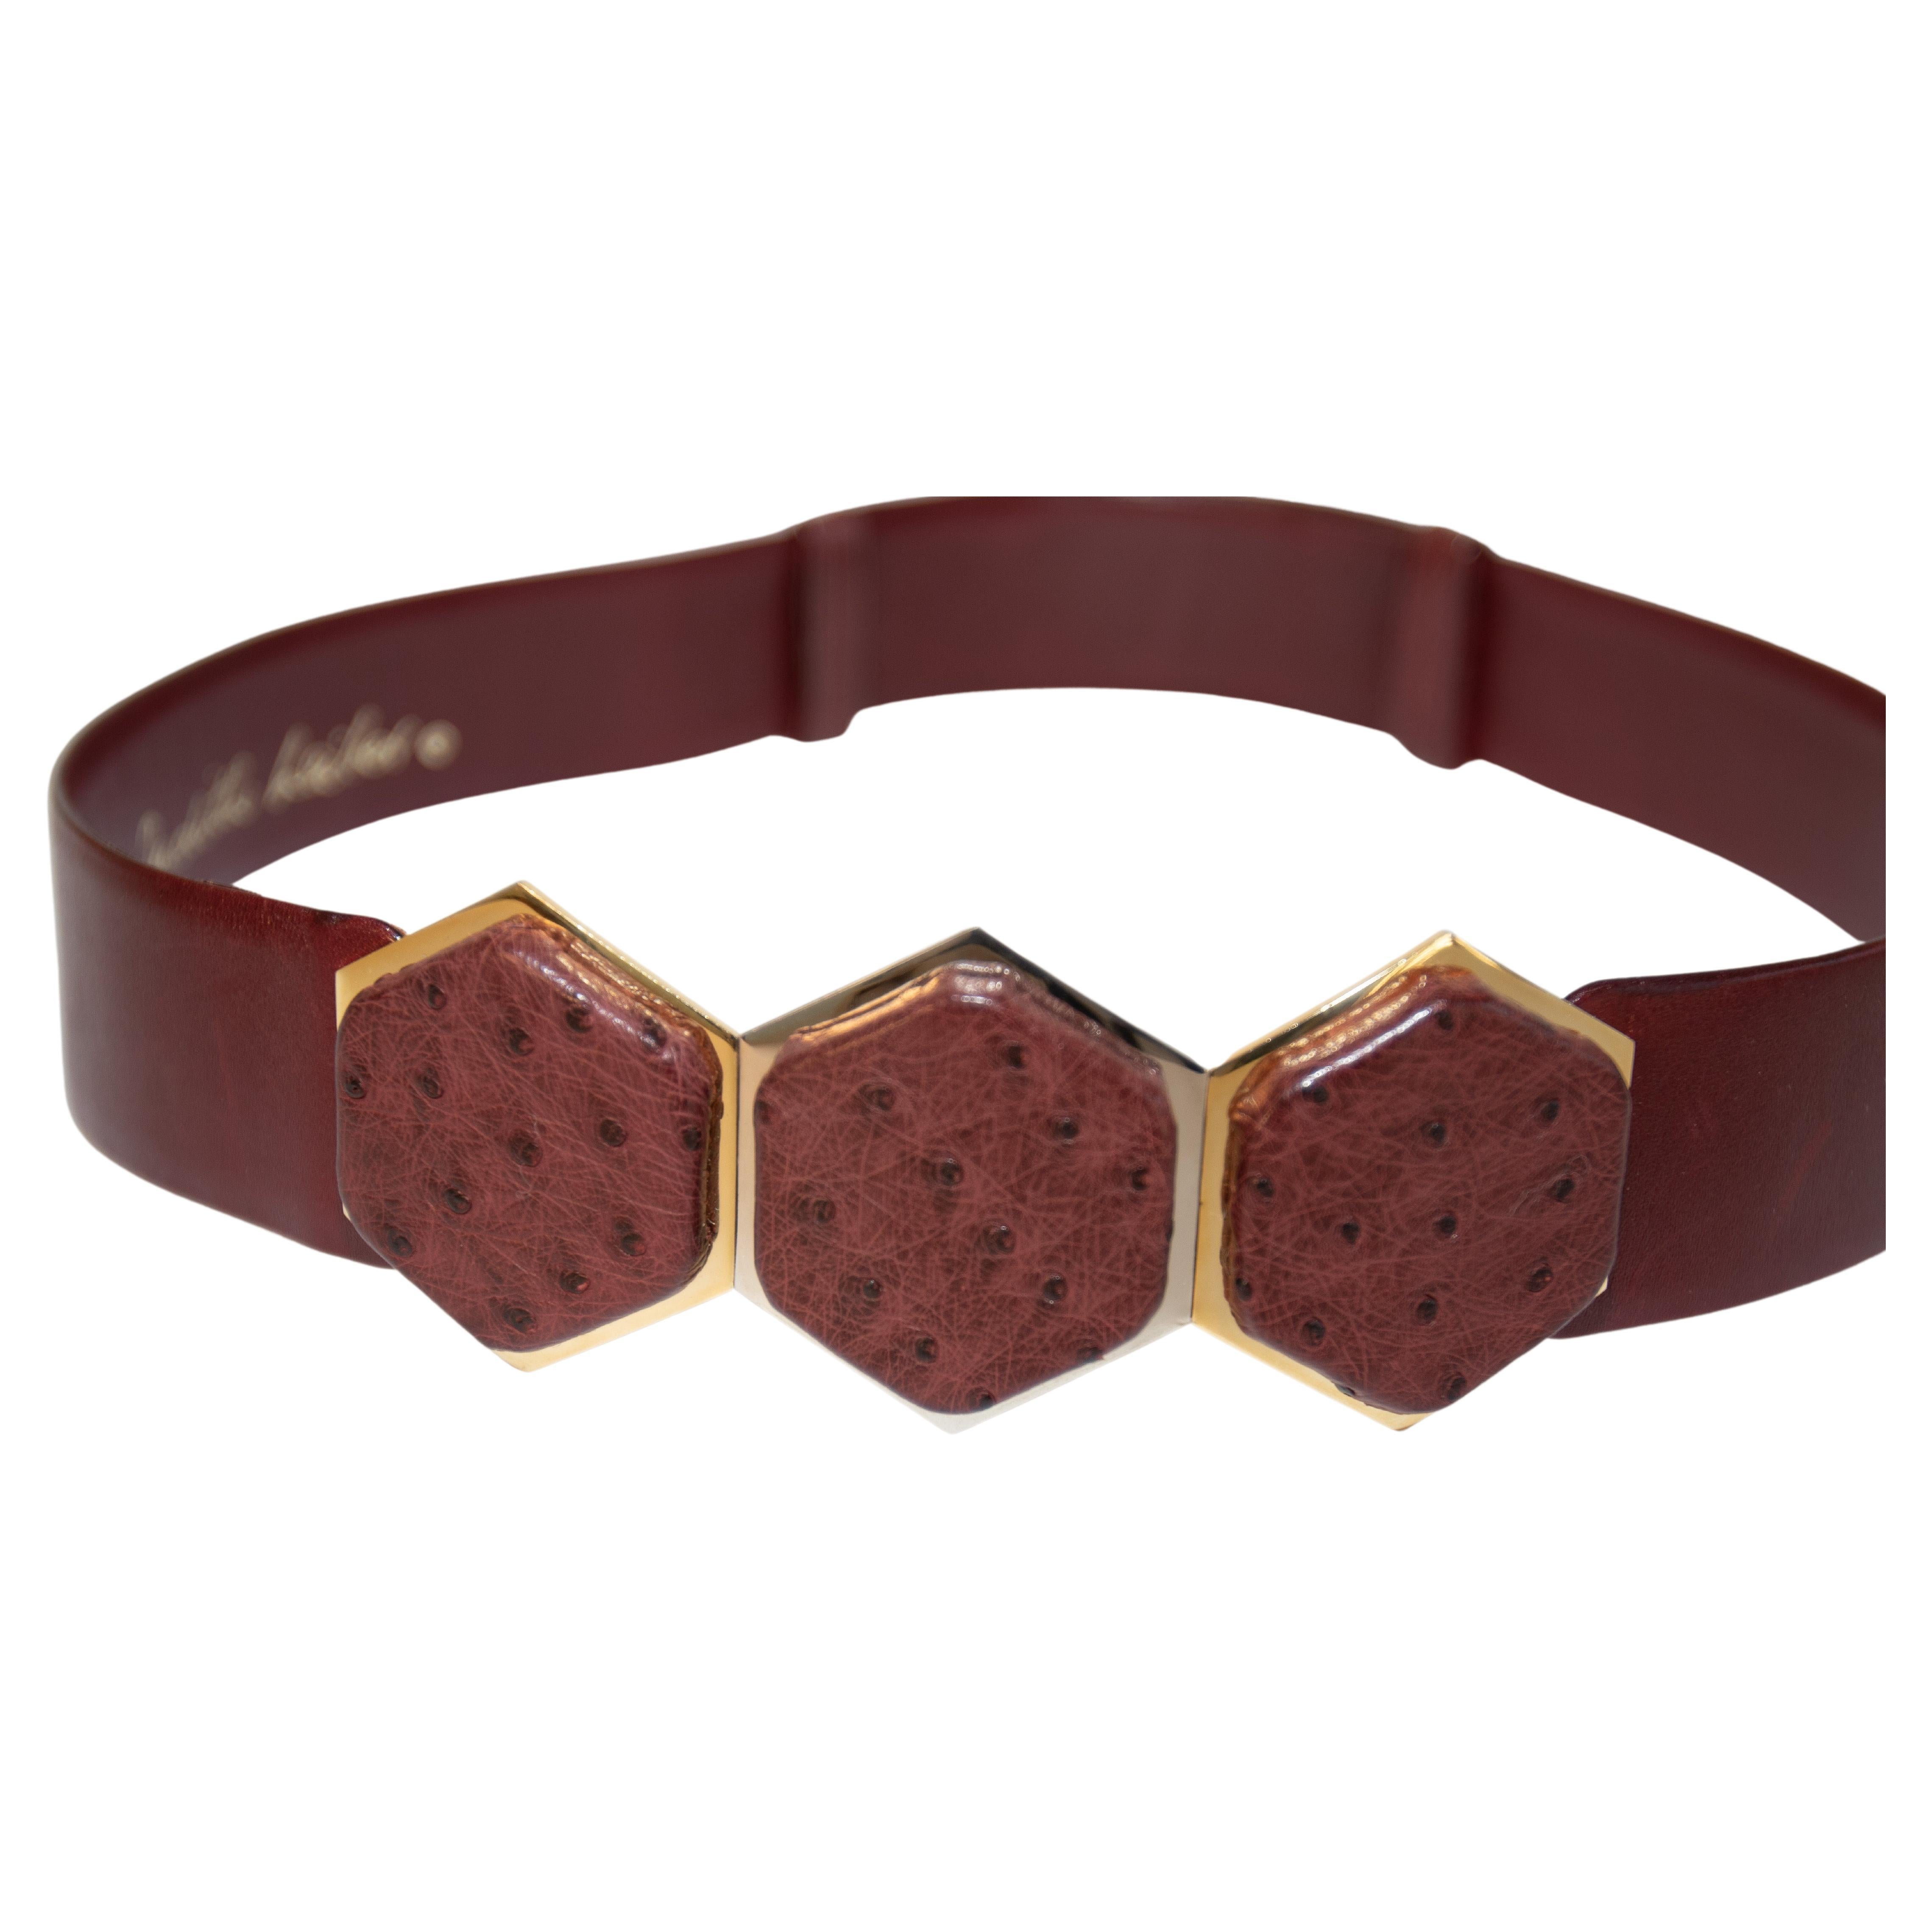 Judith Leiber brown leather belt 1980's with gold and silver tone buckle with a three large octagonal Art Deco clasp with Ostrich style leather covered cabochon.
Beautiful vintage 1980’s Judith Leiber brown maroon leather belt that has a sliding